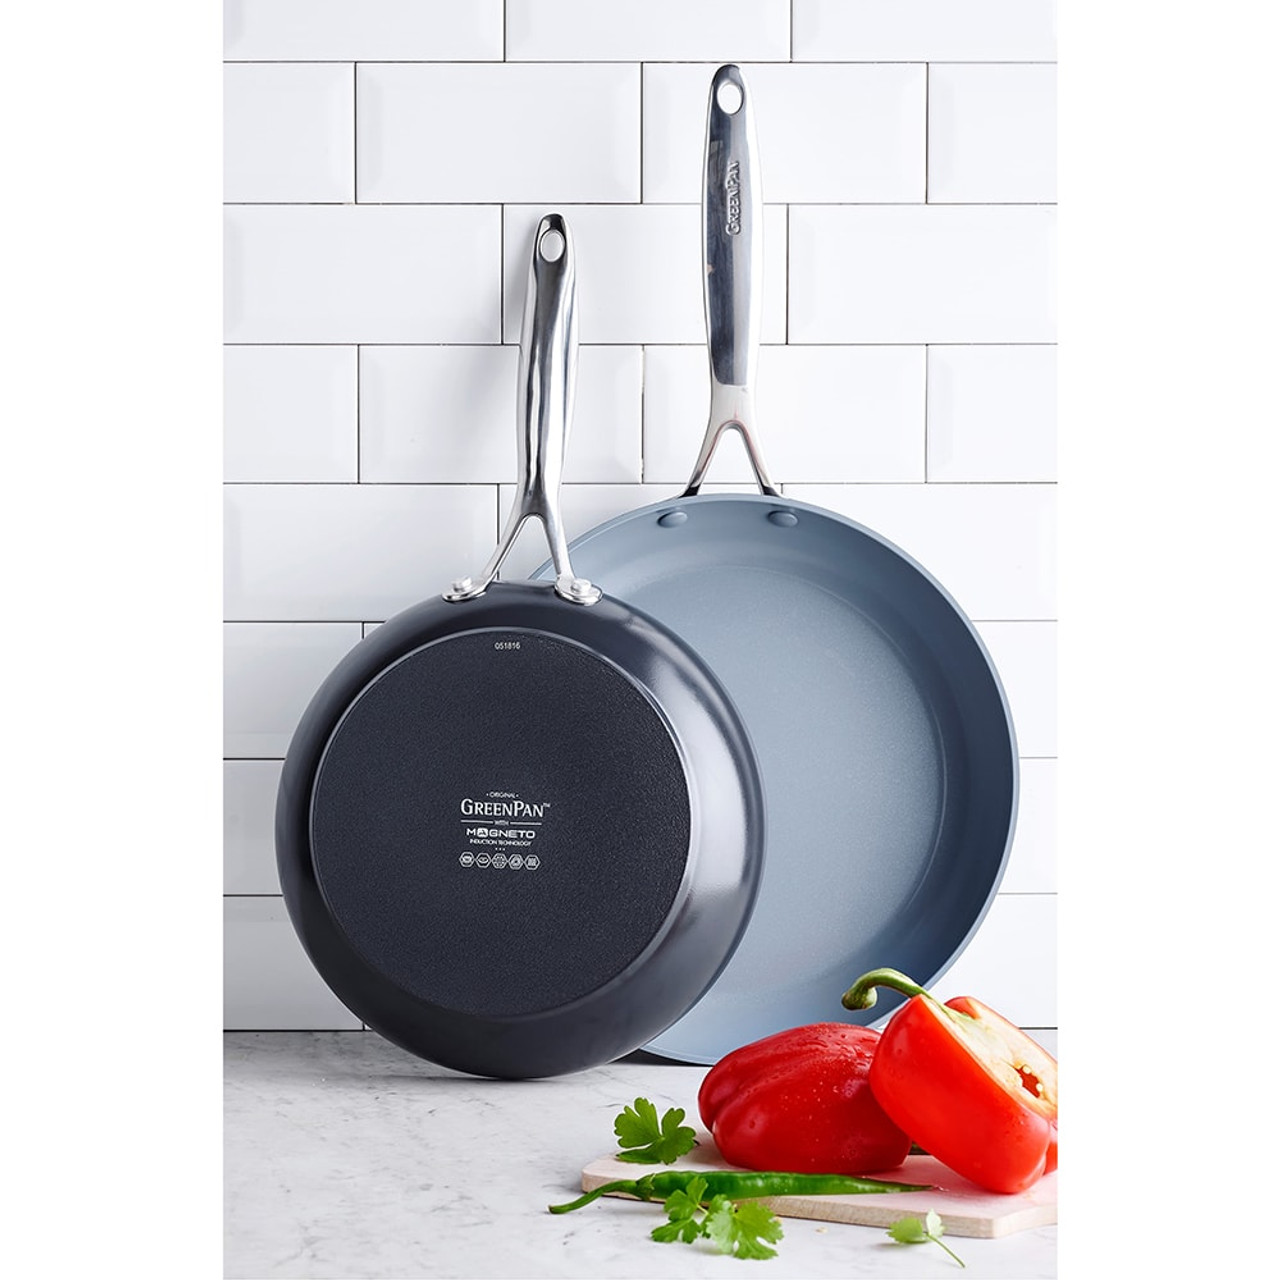 https://cdn11.bigcommerce.com/s-hccytny0od/images/stencil/1280x1280/products/2913/10308/greenpan-valencia-pro-fry-pan-set-10-12in-2__42497.1569757001.jpg?c=2?imbypass=on